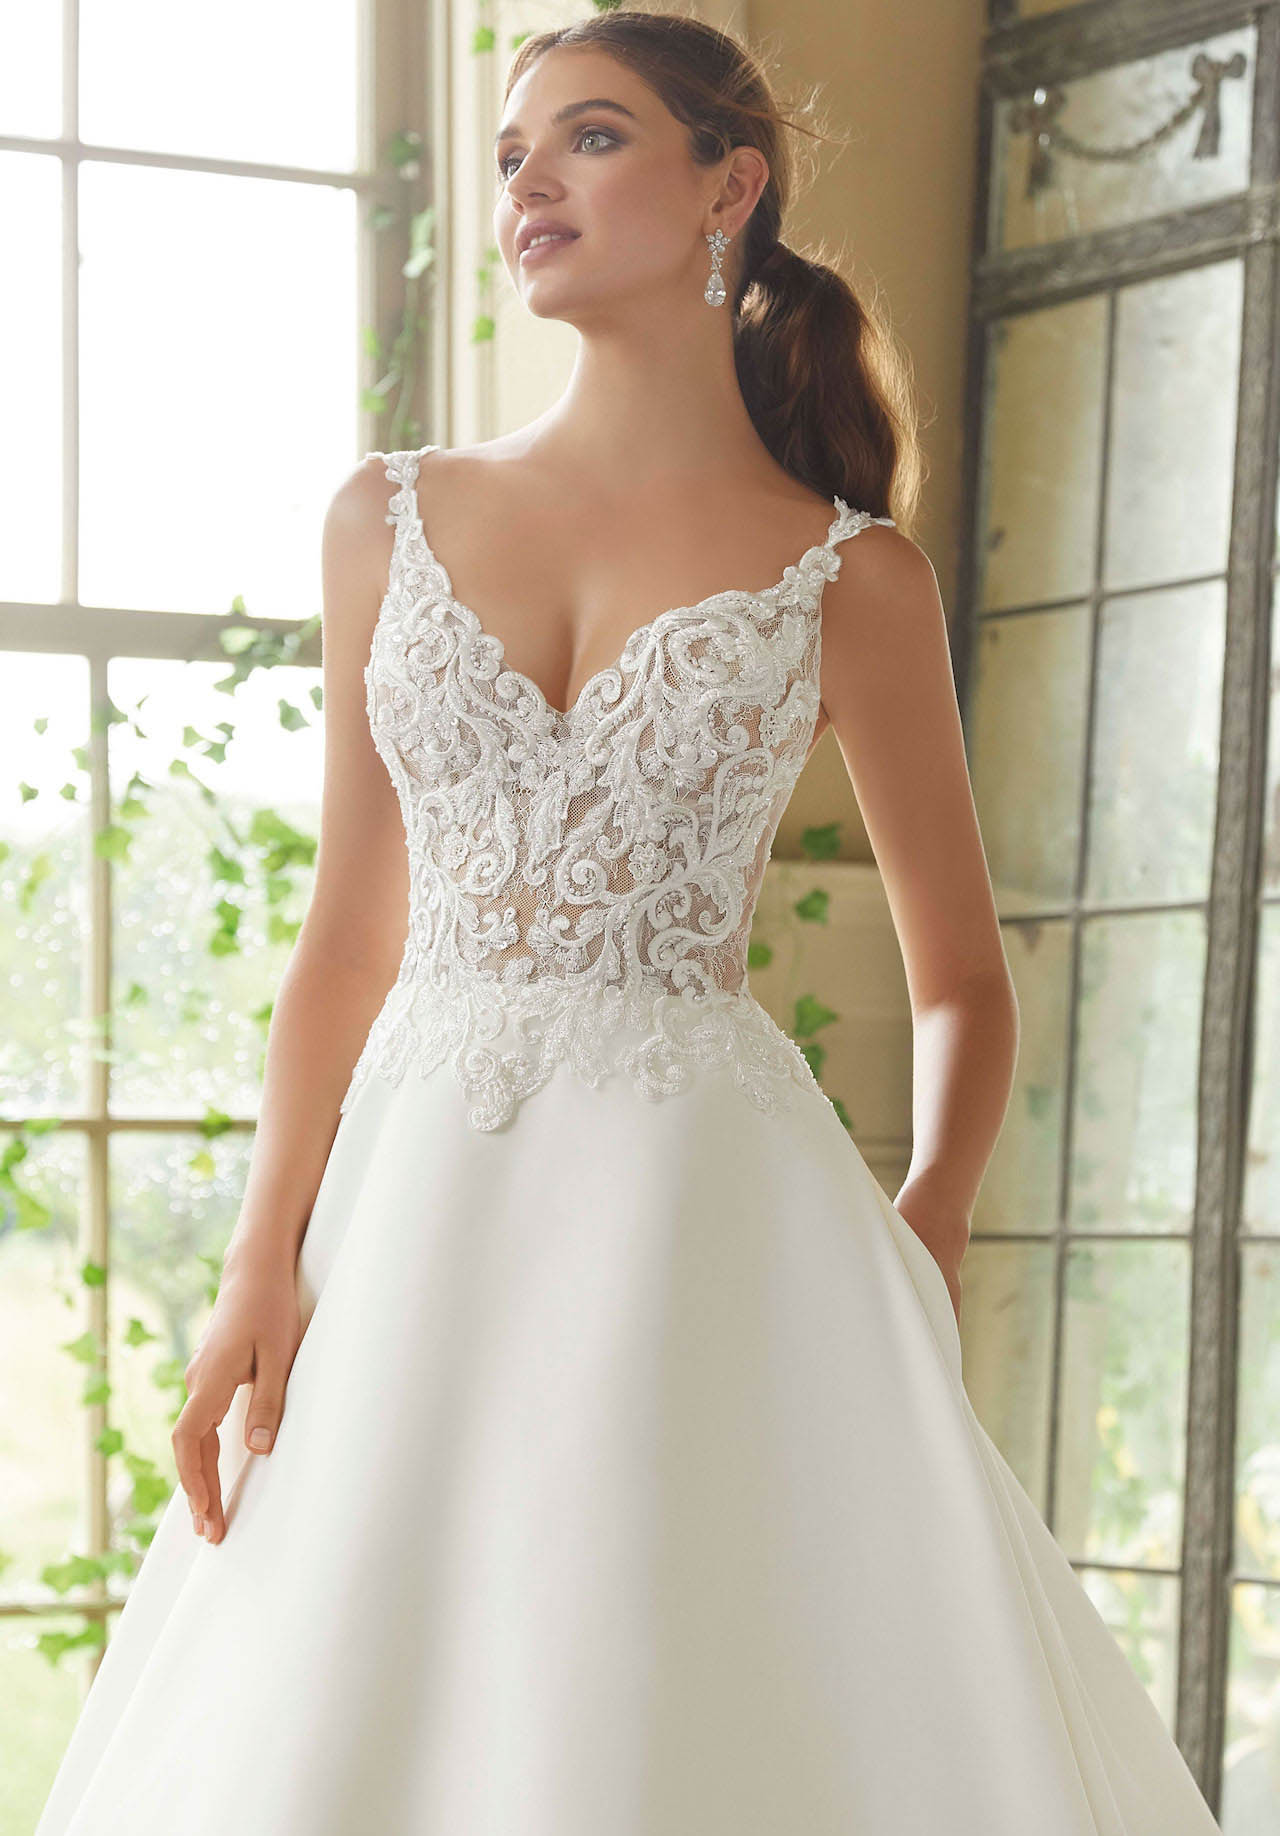 Petrova Wedding Gown By Mori Lee - Now Available At Emerald Bridal